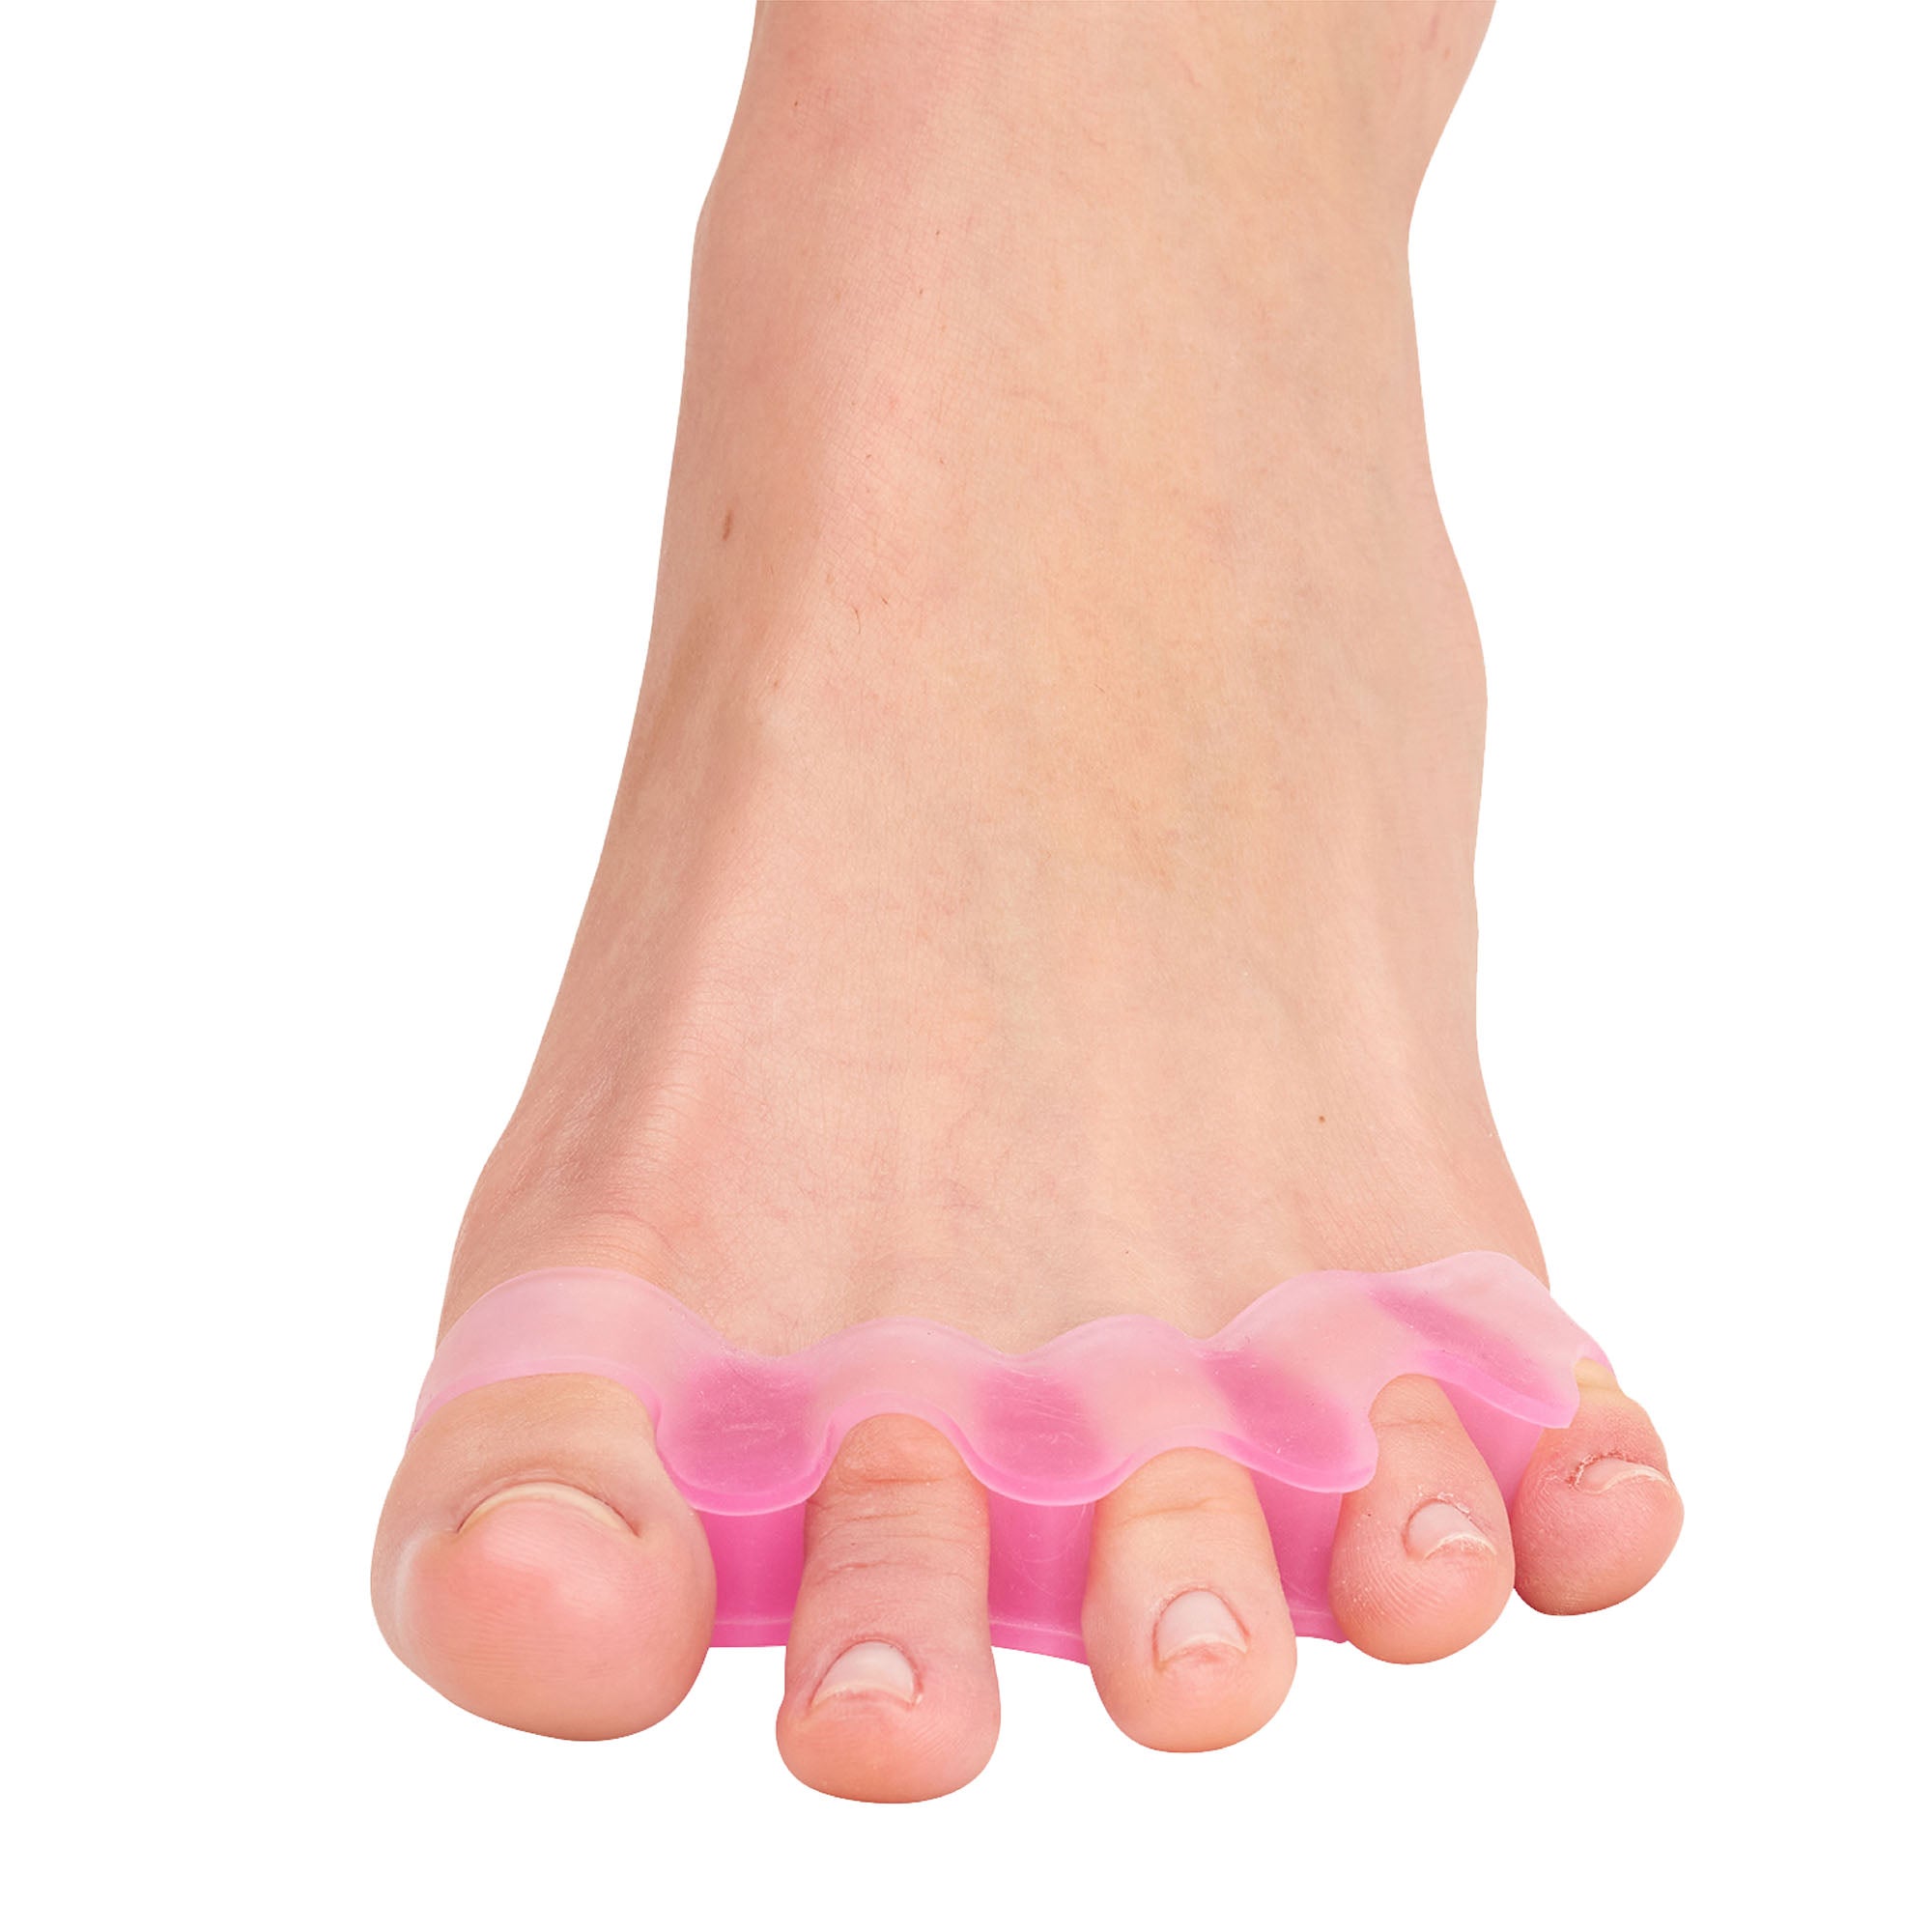 Silicone Toe Spacers for Correct Toe Alignment - 2 Pairs - ZenToes